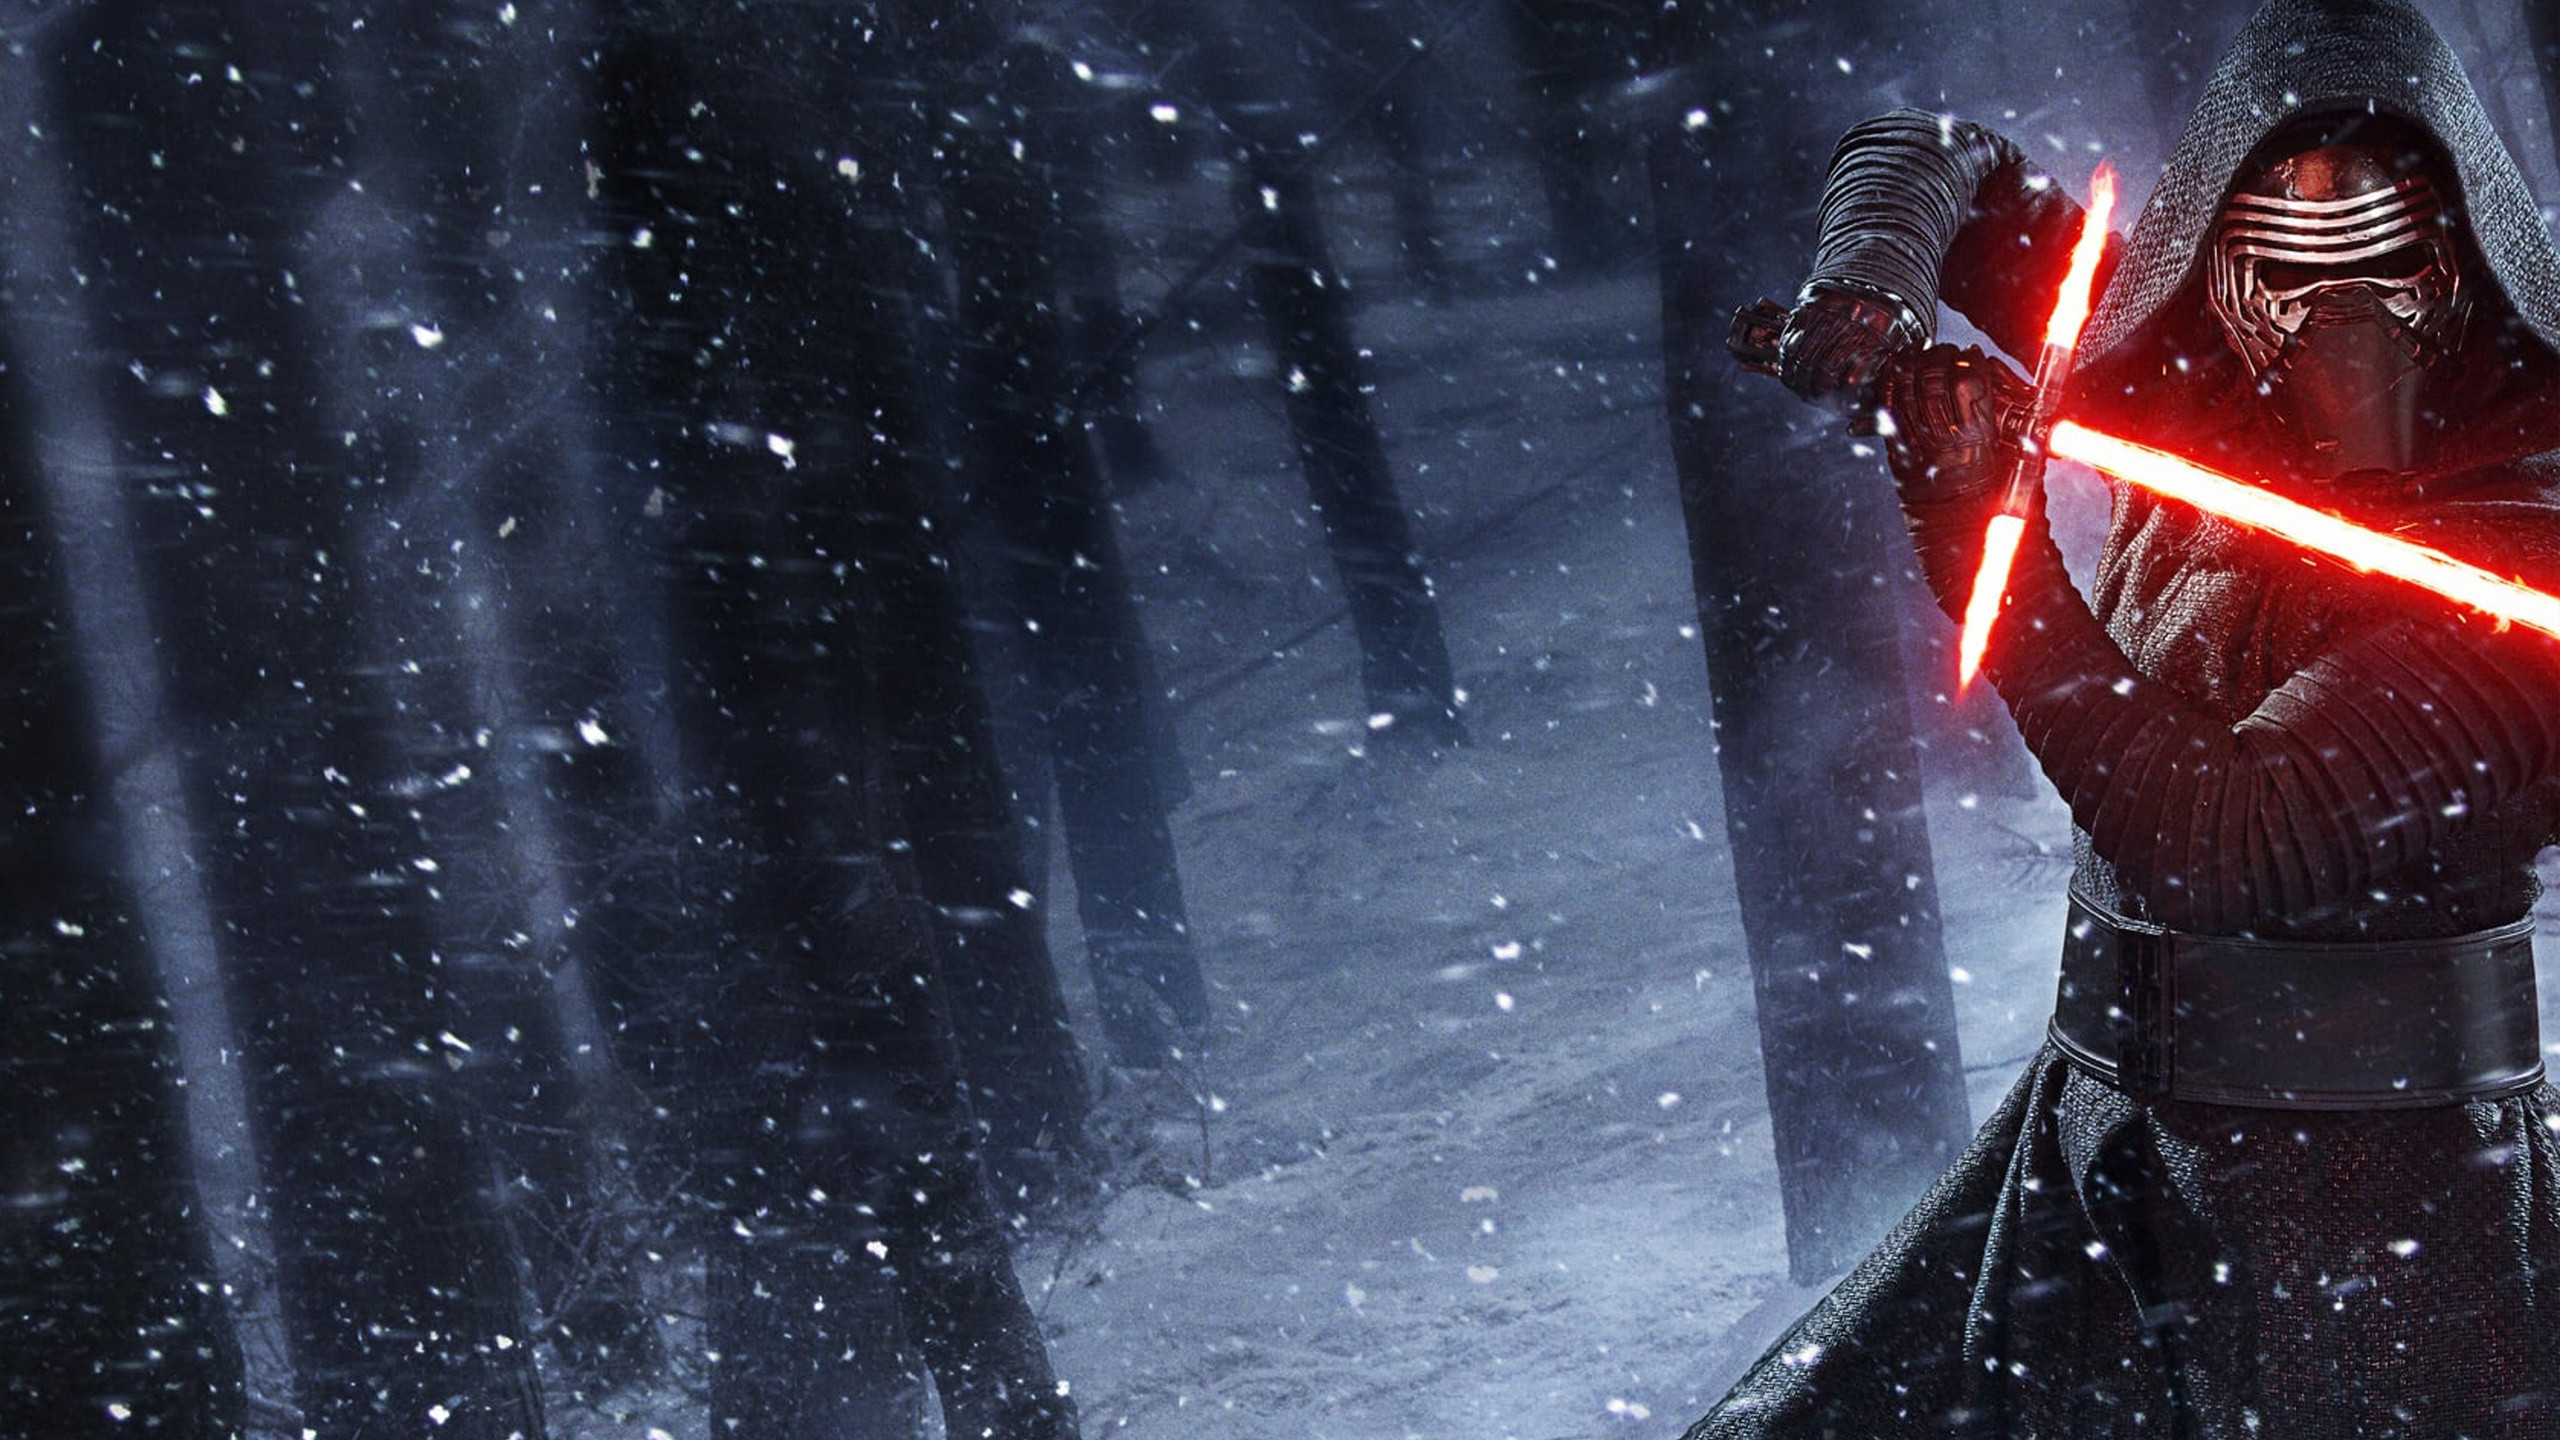 2560x1440 Star Wars the Force Awakens Wallpapers